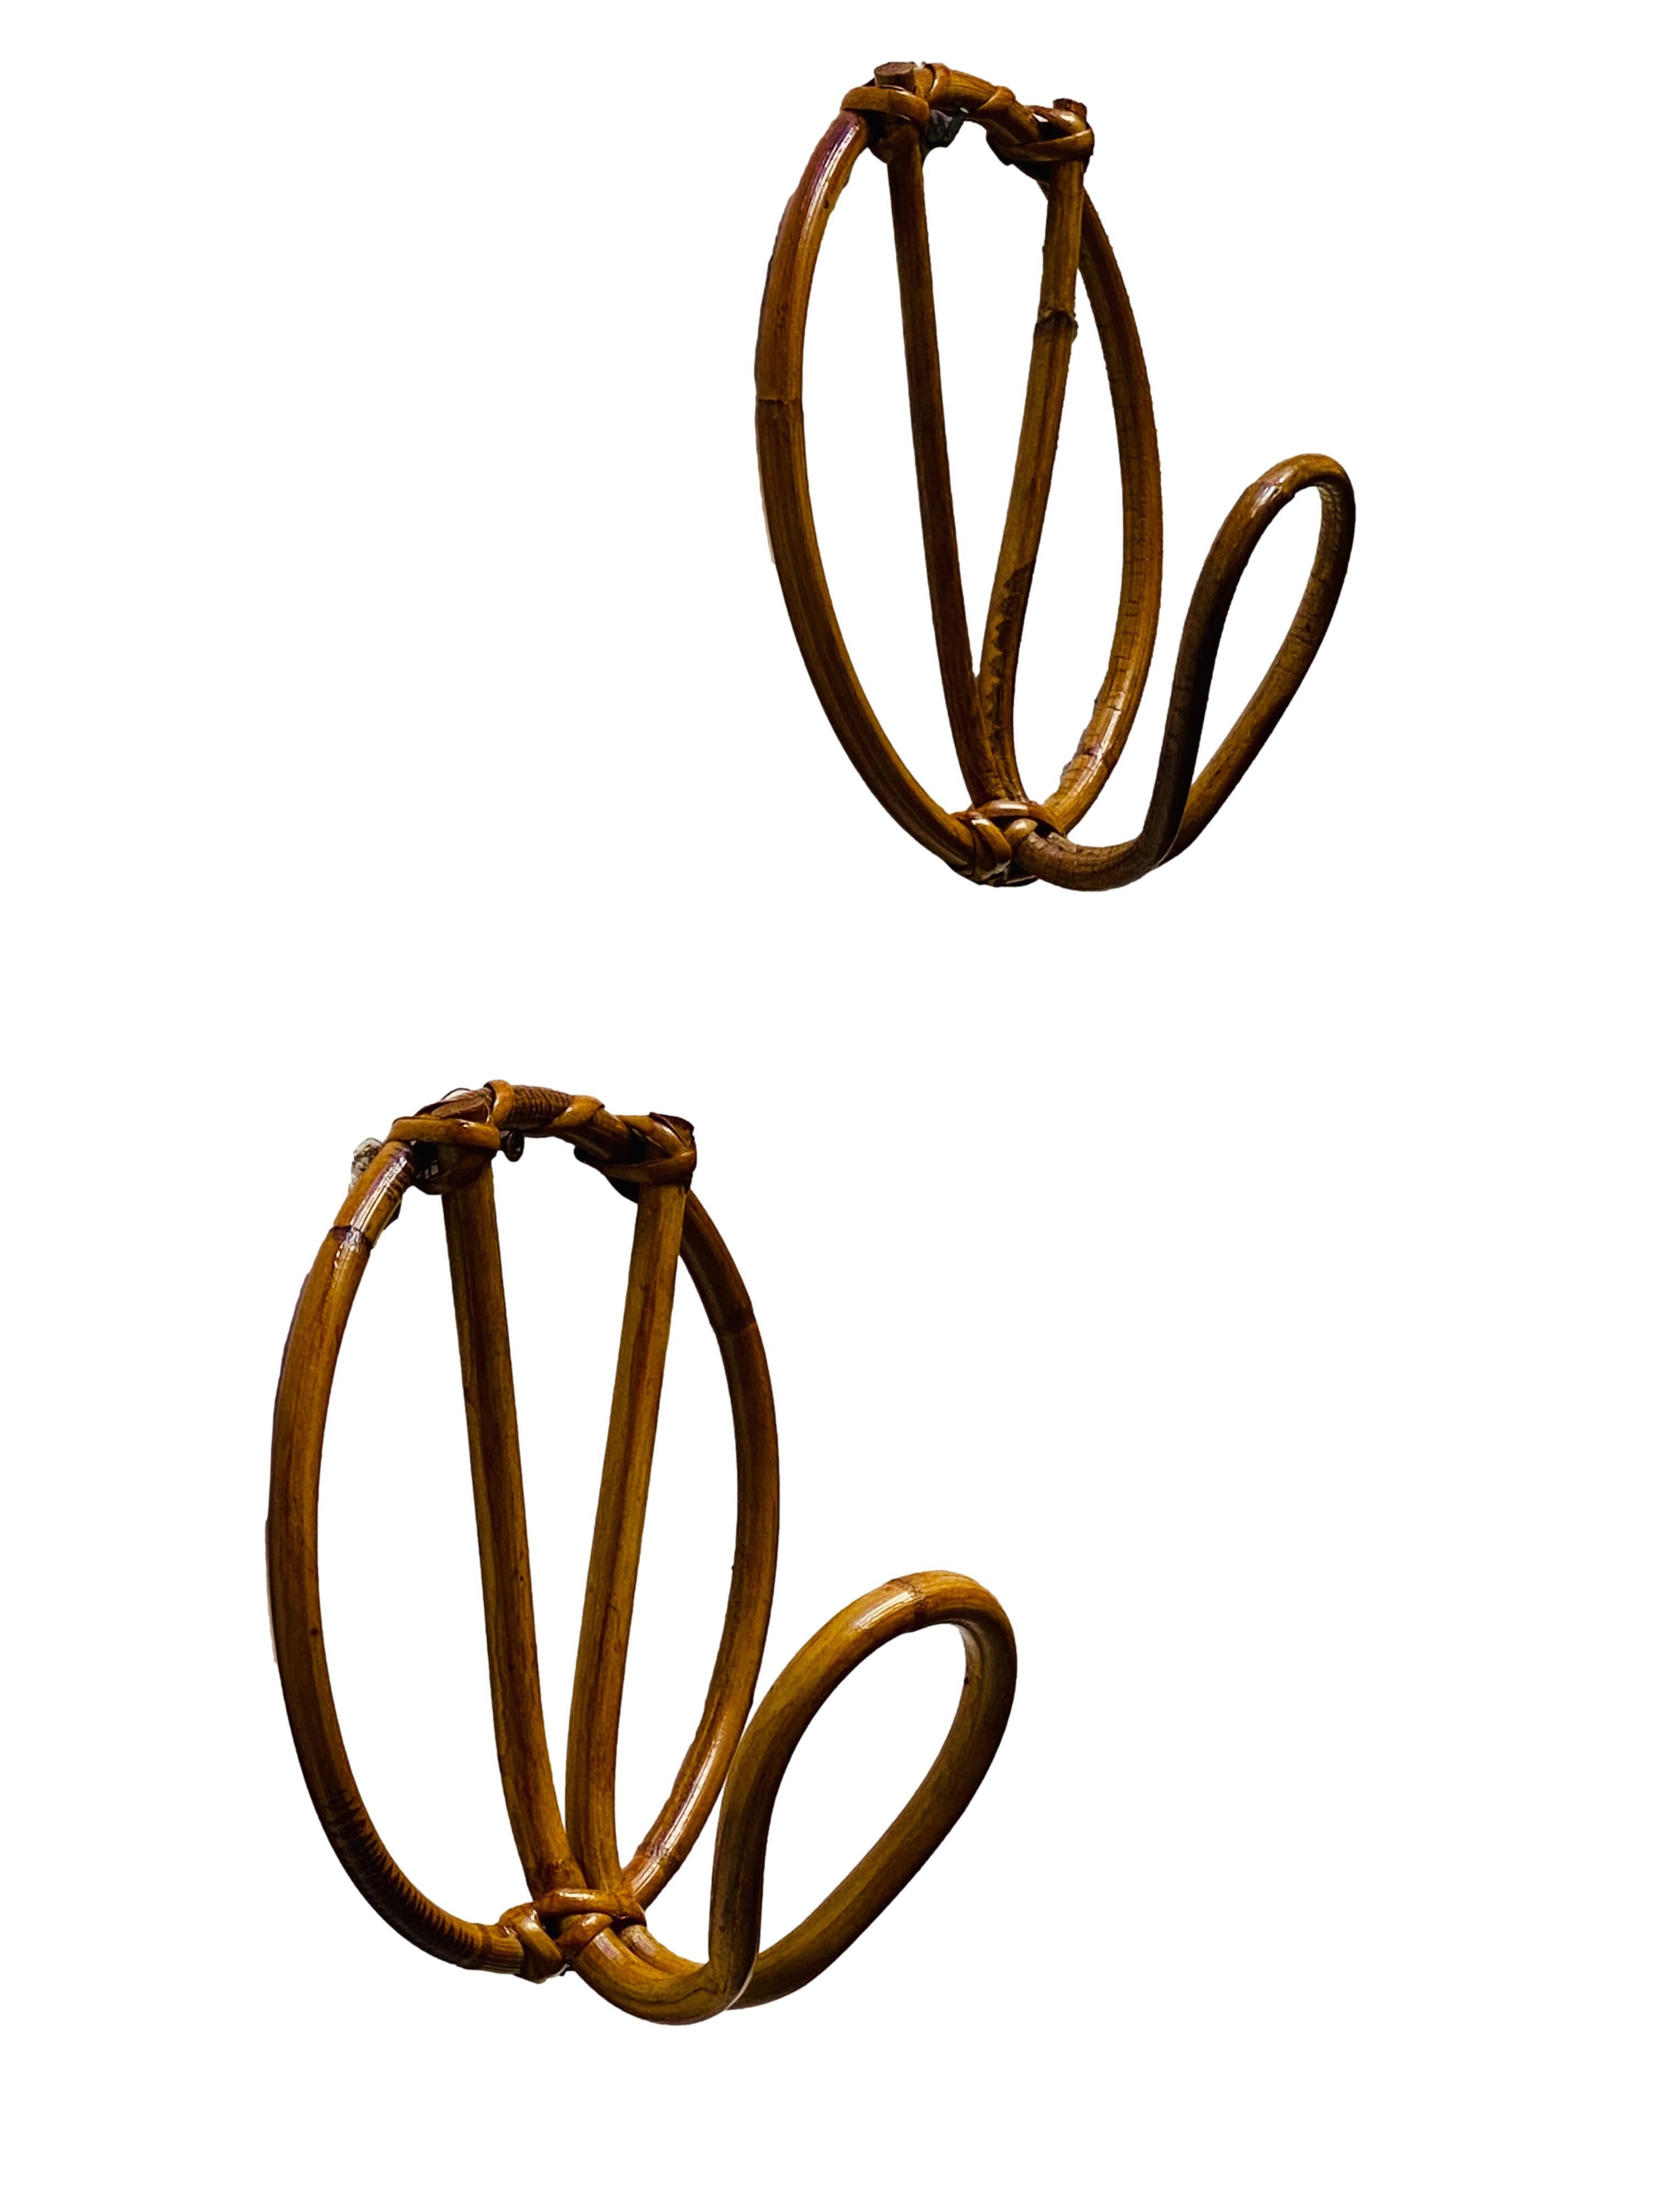 Pair of round rattan and bamboo coat hangers, single hook, Franco Albini for Bonacina. Made in Italy in the 1960s.